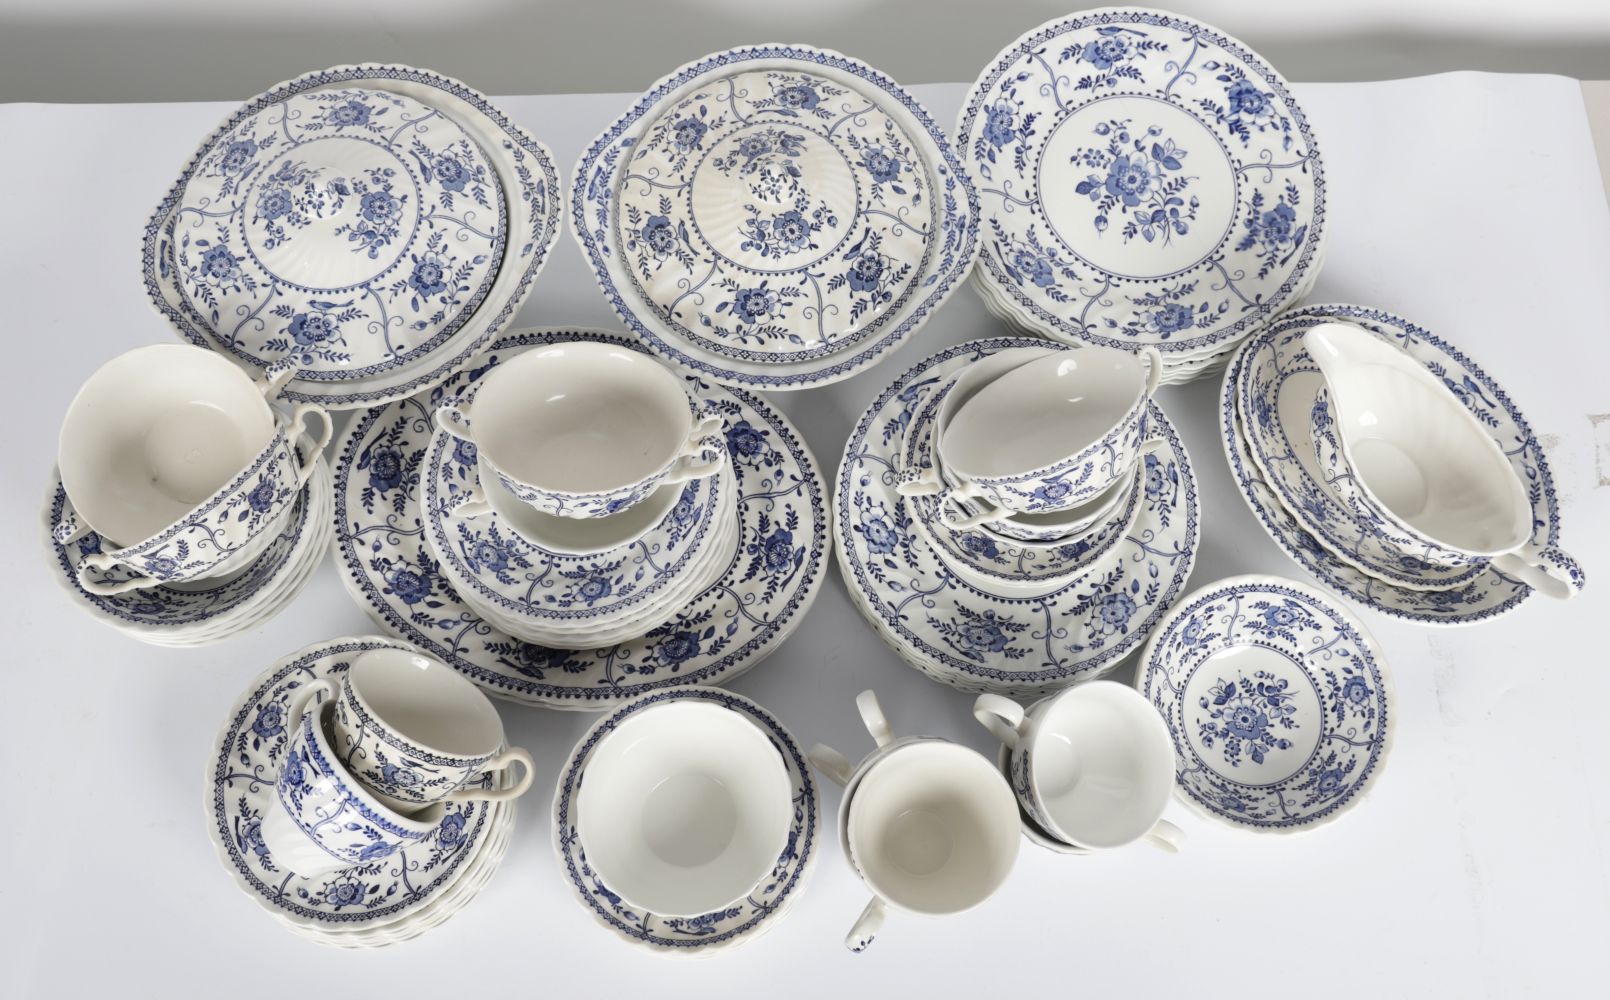 74 PIECE BLUE & WHITE DINNER SERVICE - Image 3 of 3